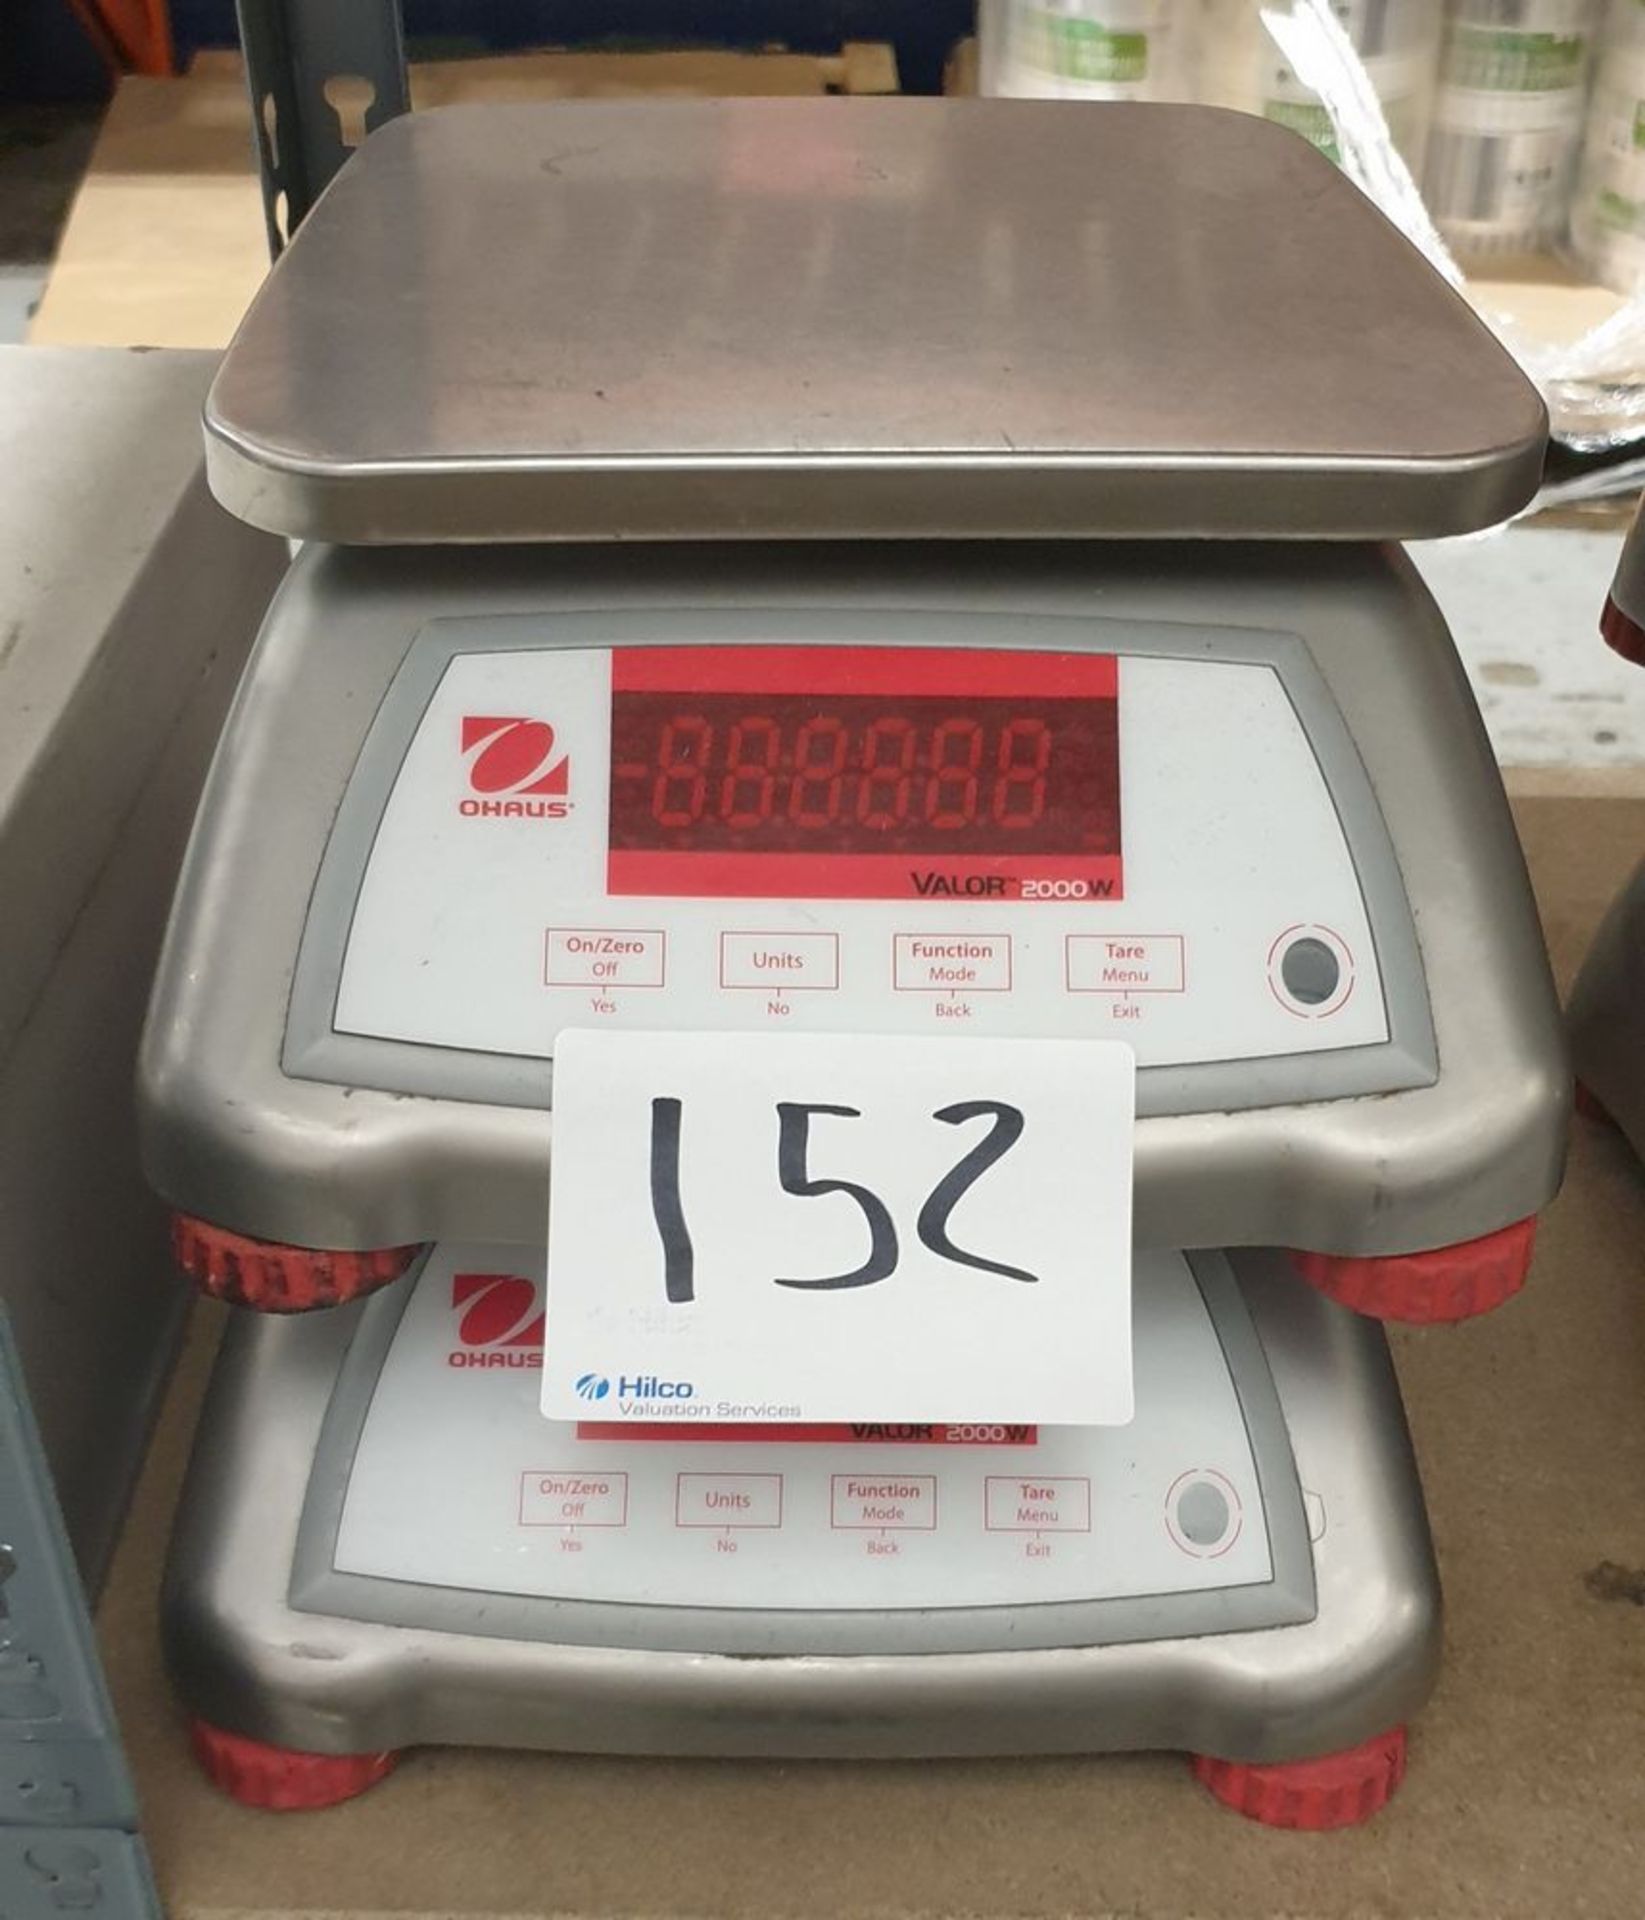 2: Ohaus Valor 2000W Scales